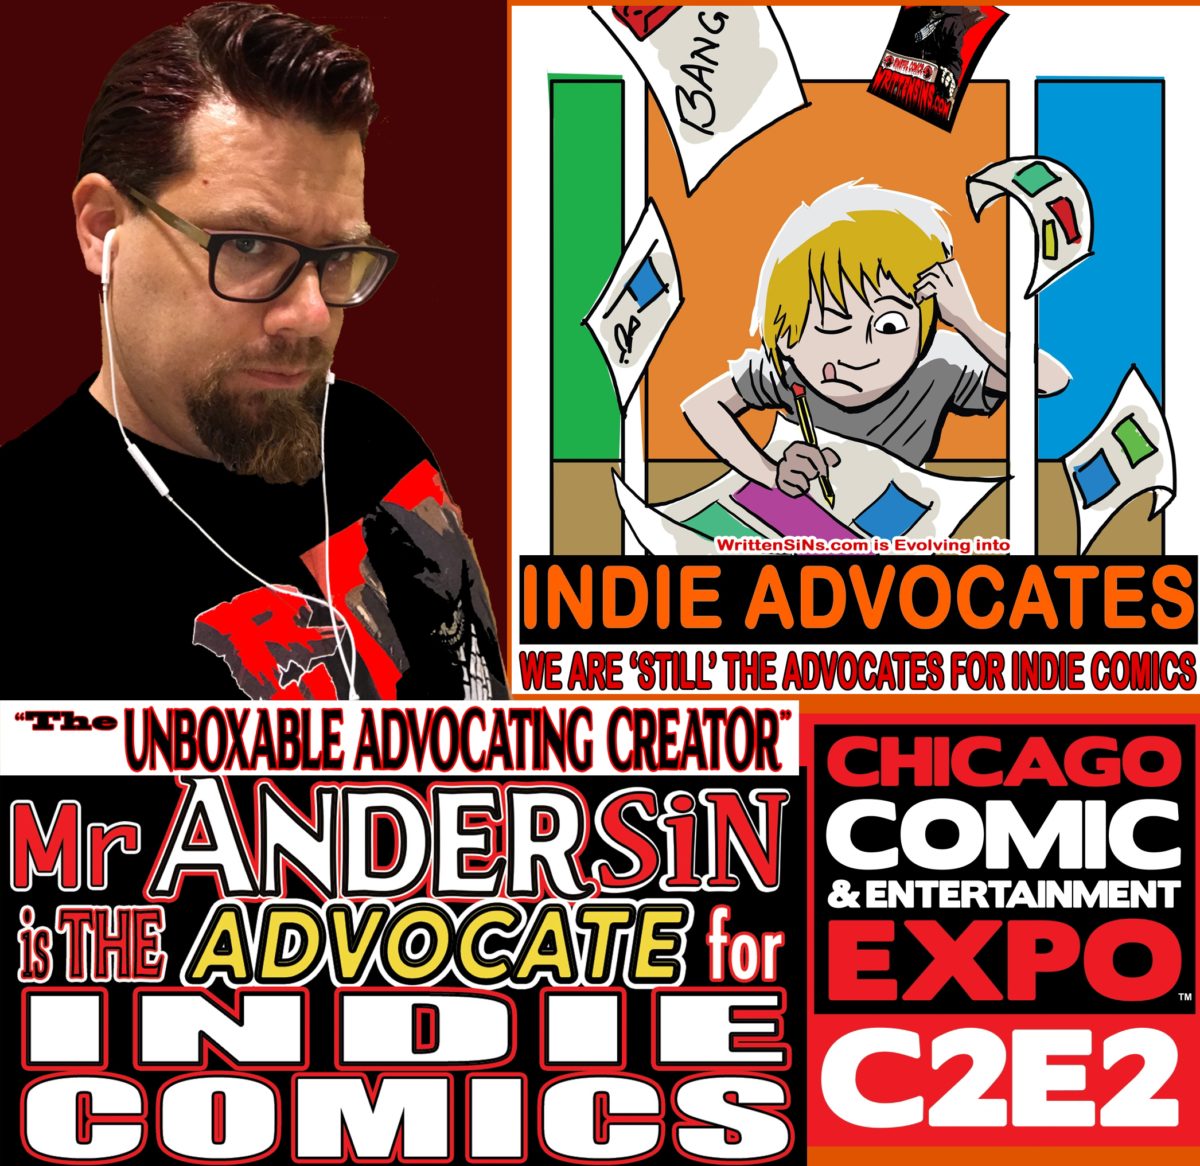 COMIC CON HIGHWAY INDIE ADVOCATING in the  MIDWEST::  INDIE ADVOCATES and The UNBOXABLE ADVOCATING CREATOR will be at C2E2 April 6-8  .  .